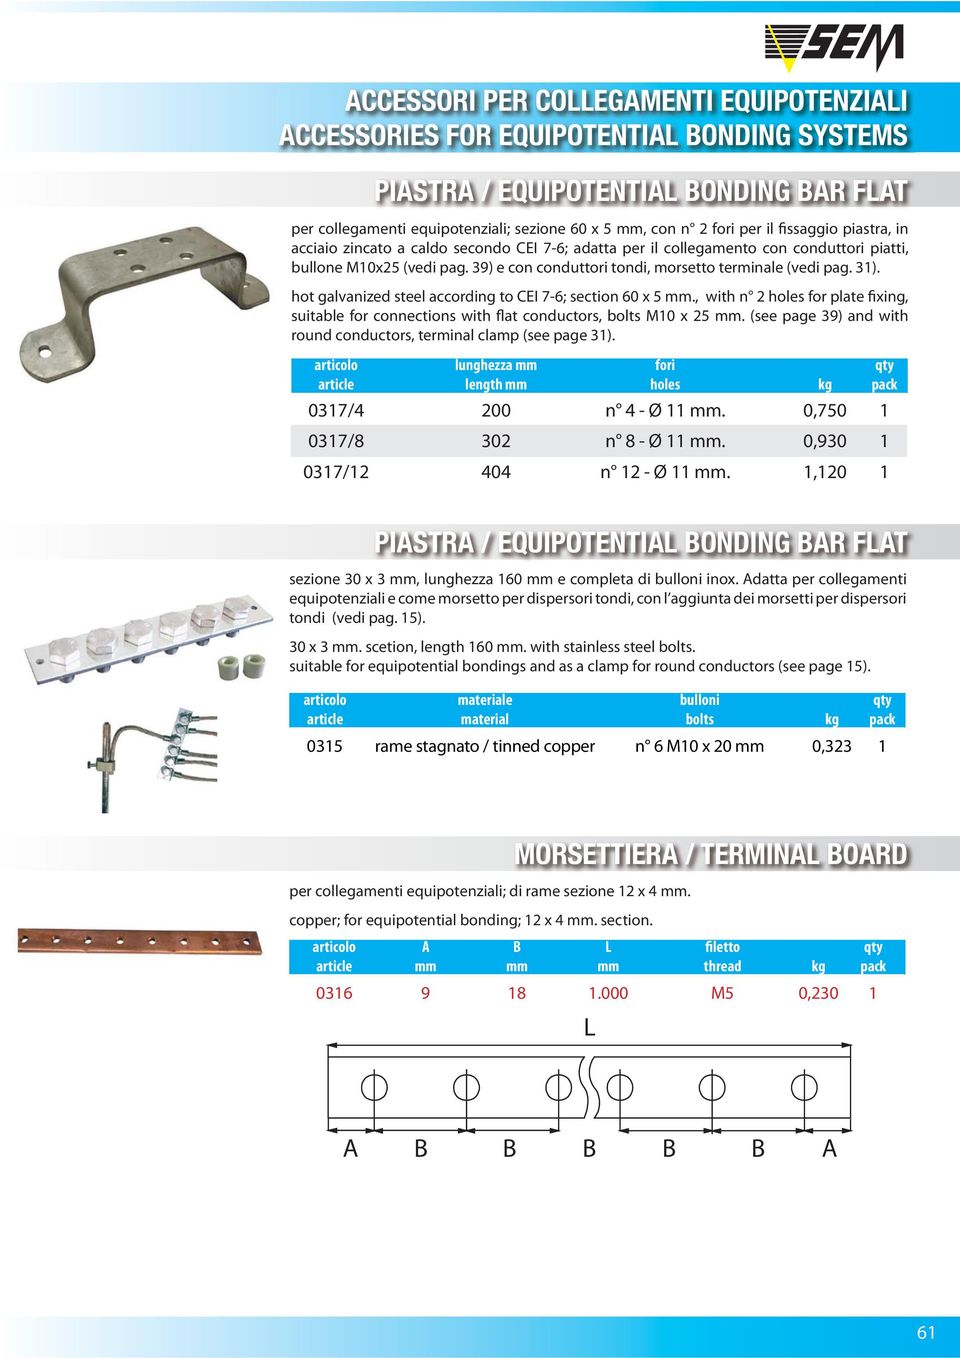 , with n 2 holes for plate fixing, suitable for connections with flat conductors, bolts M10 x 25 mm. (see page 39) and with round conductors, terminal clamp (see page 31).